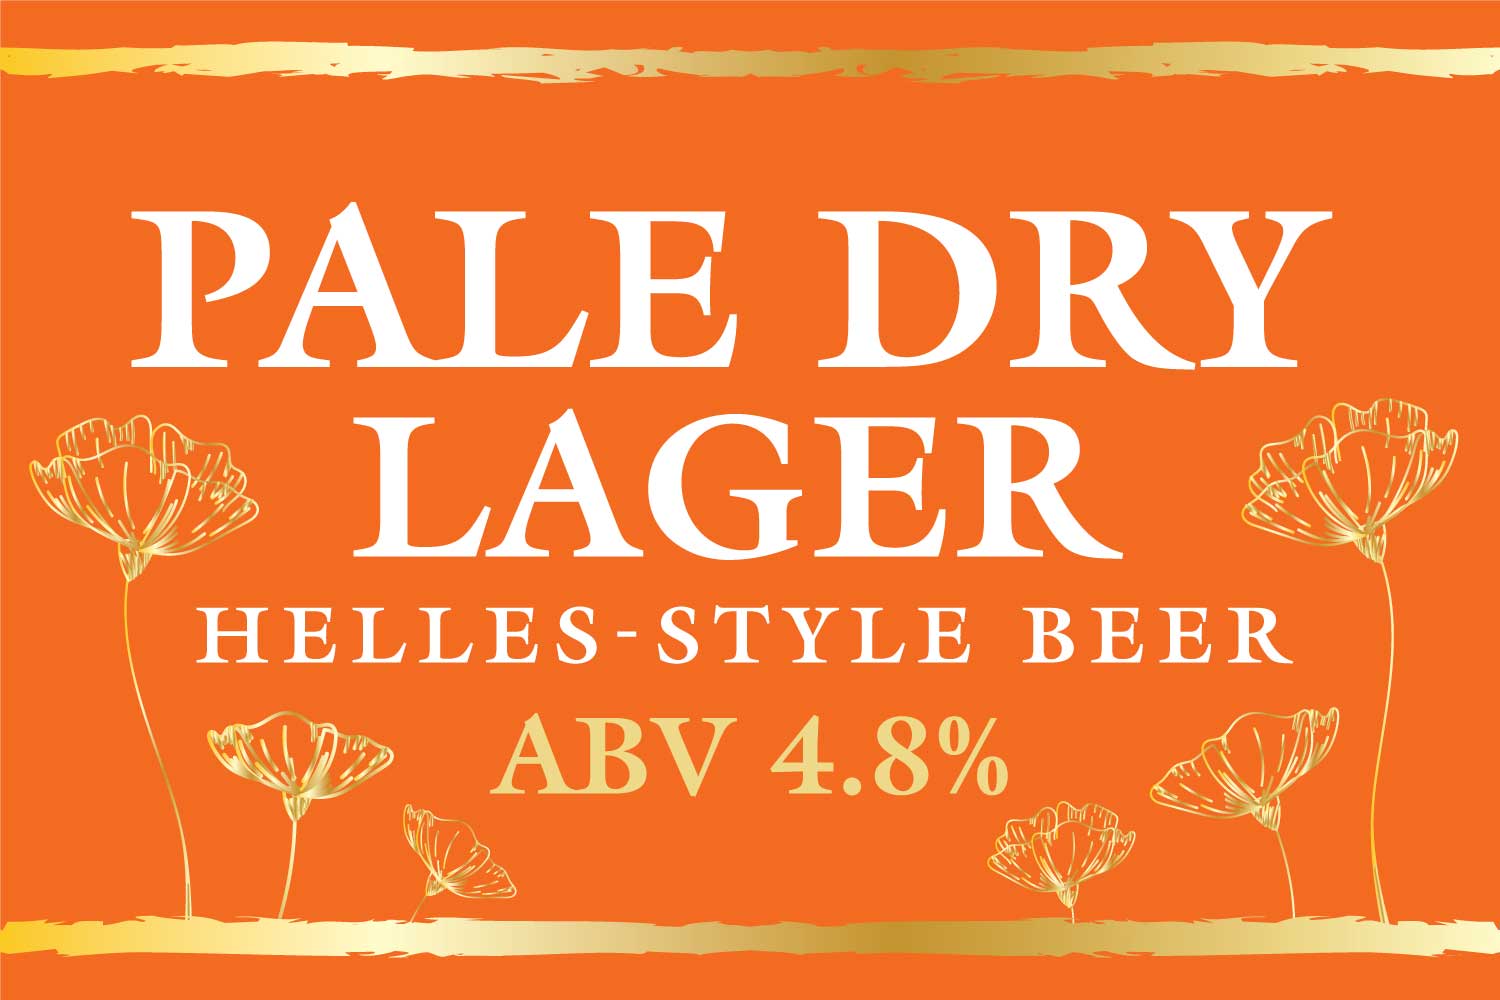 Pale Dry Lager Helles-Style beer sign